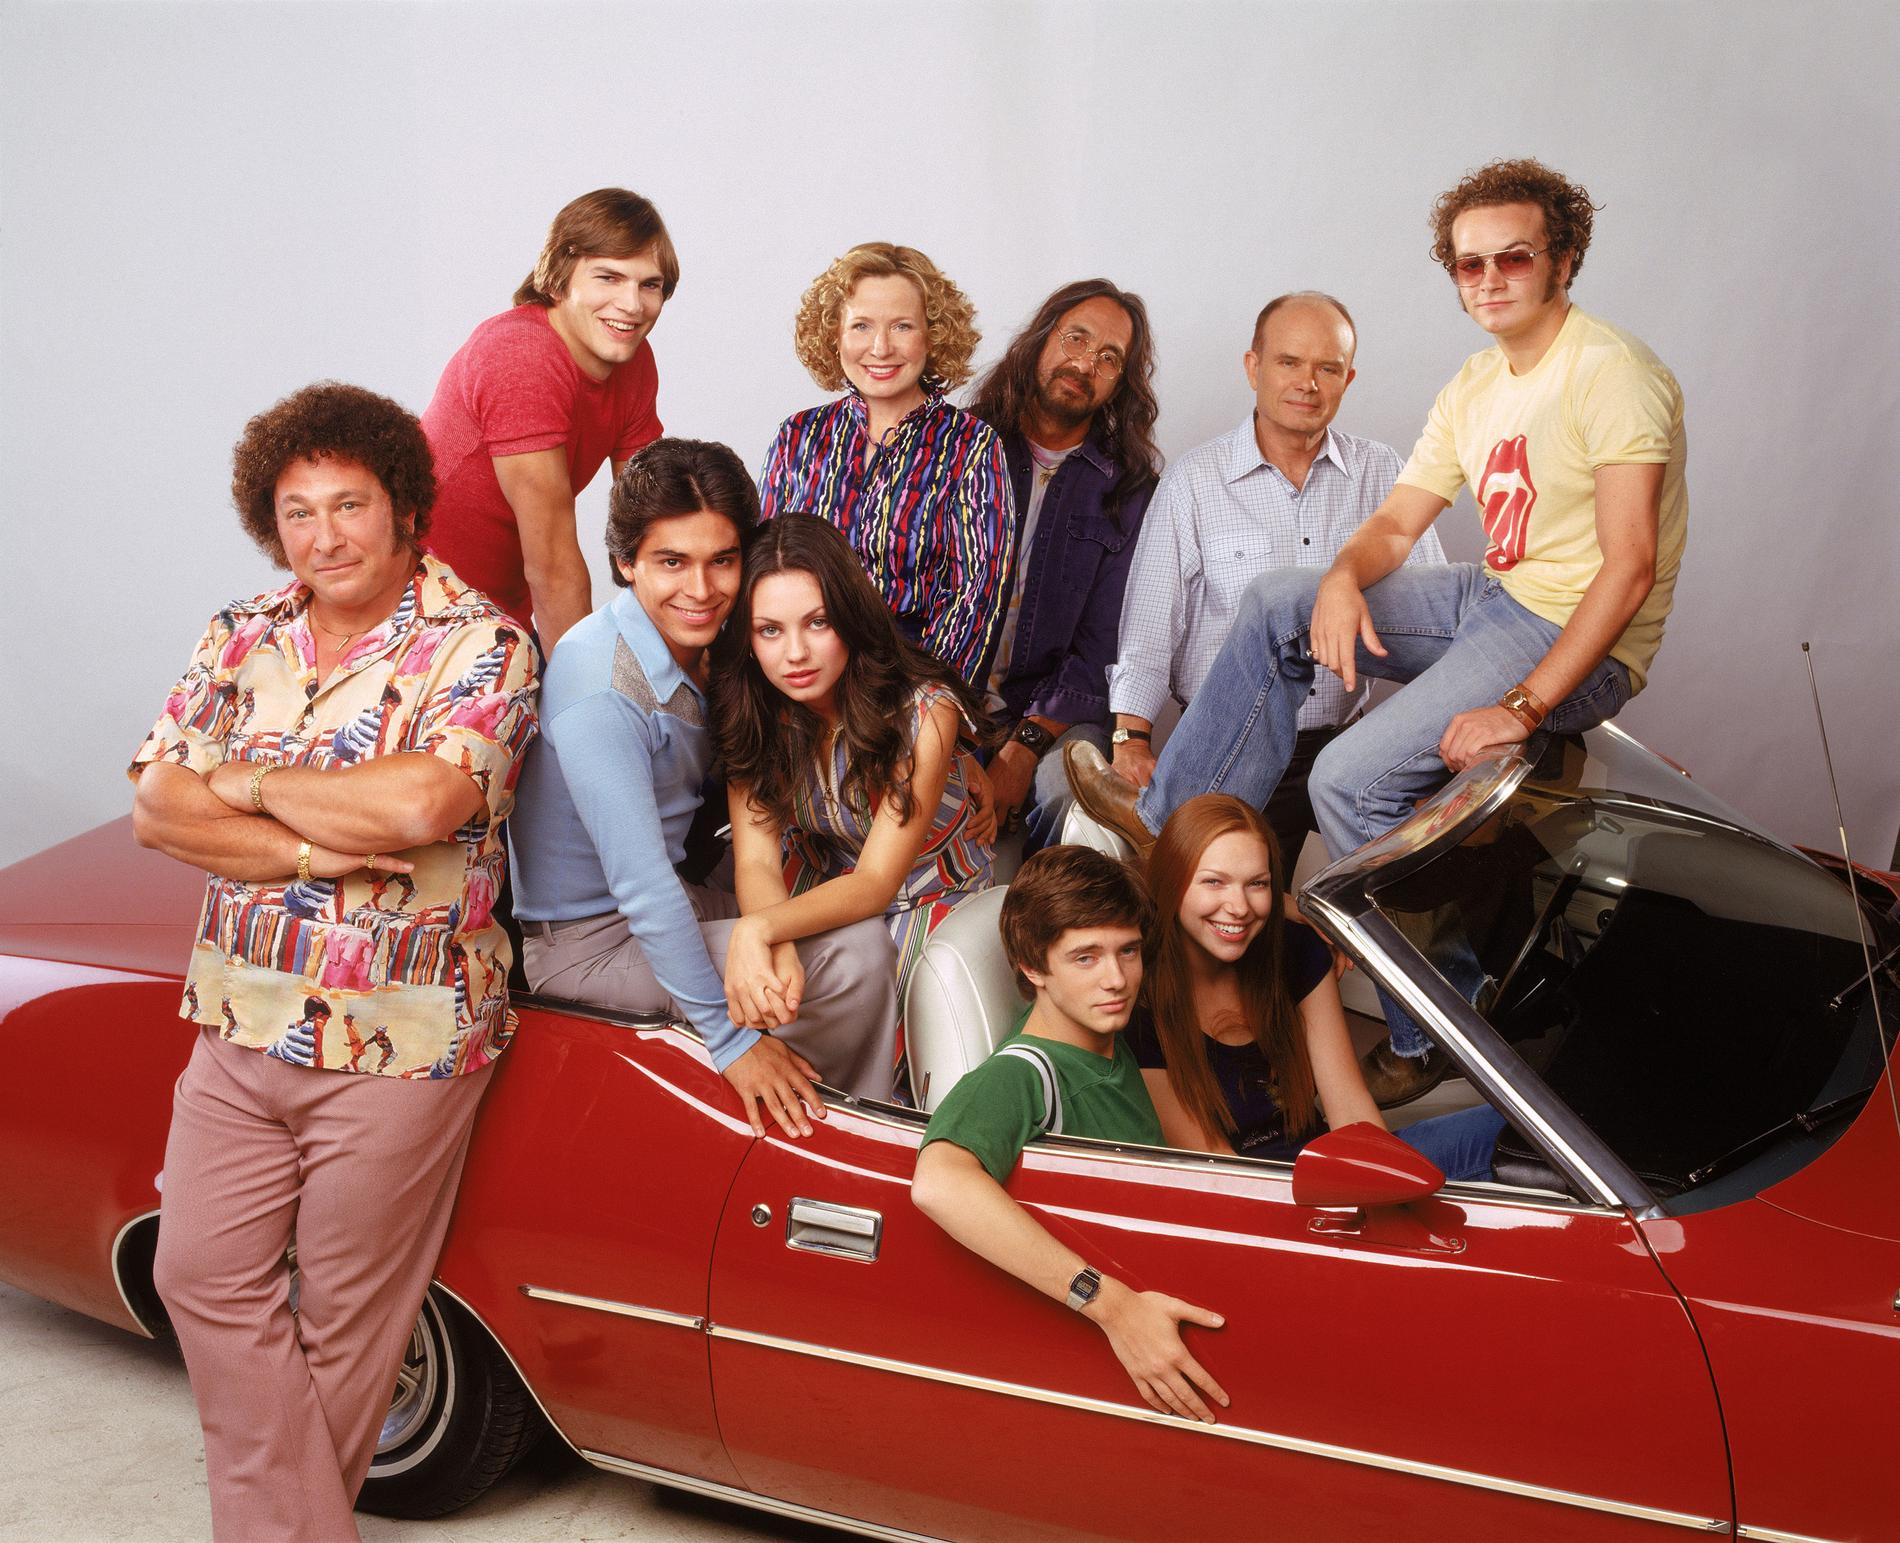 That 70’s show.